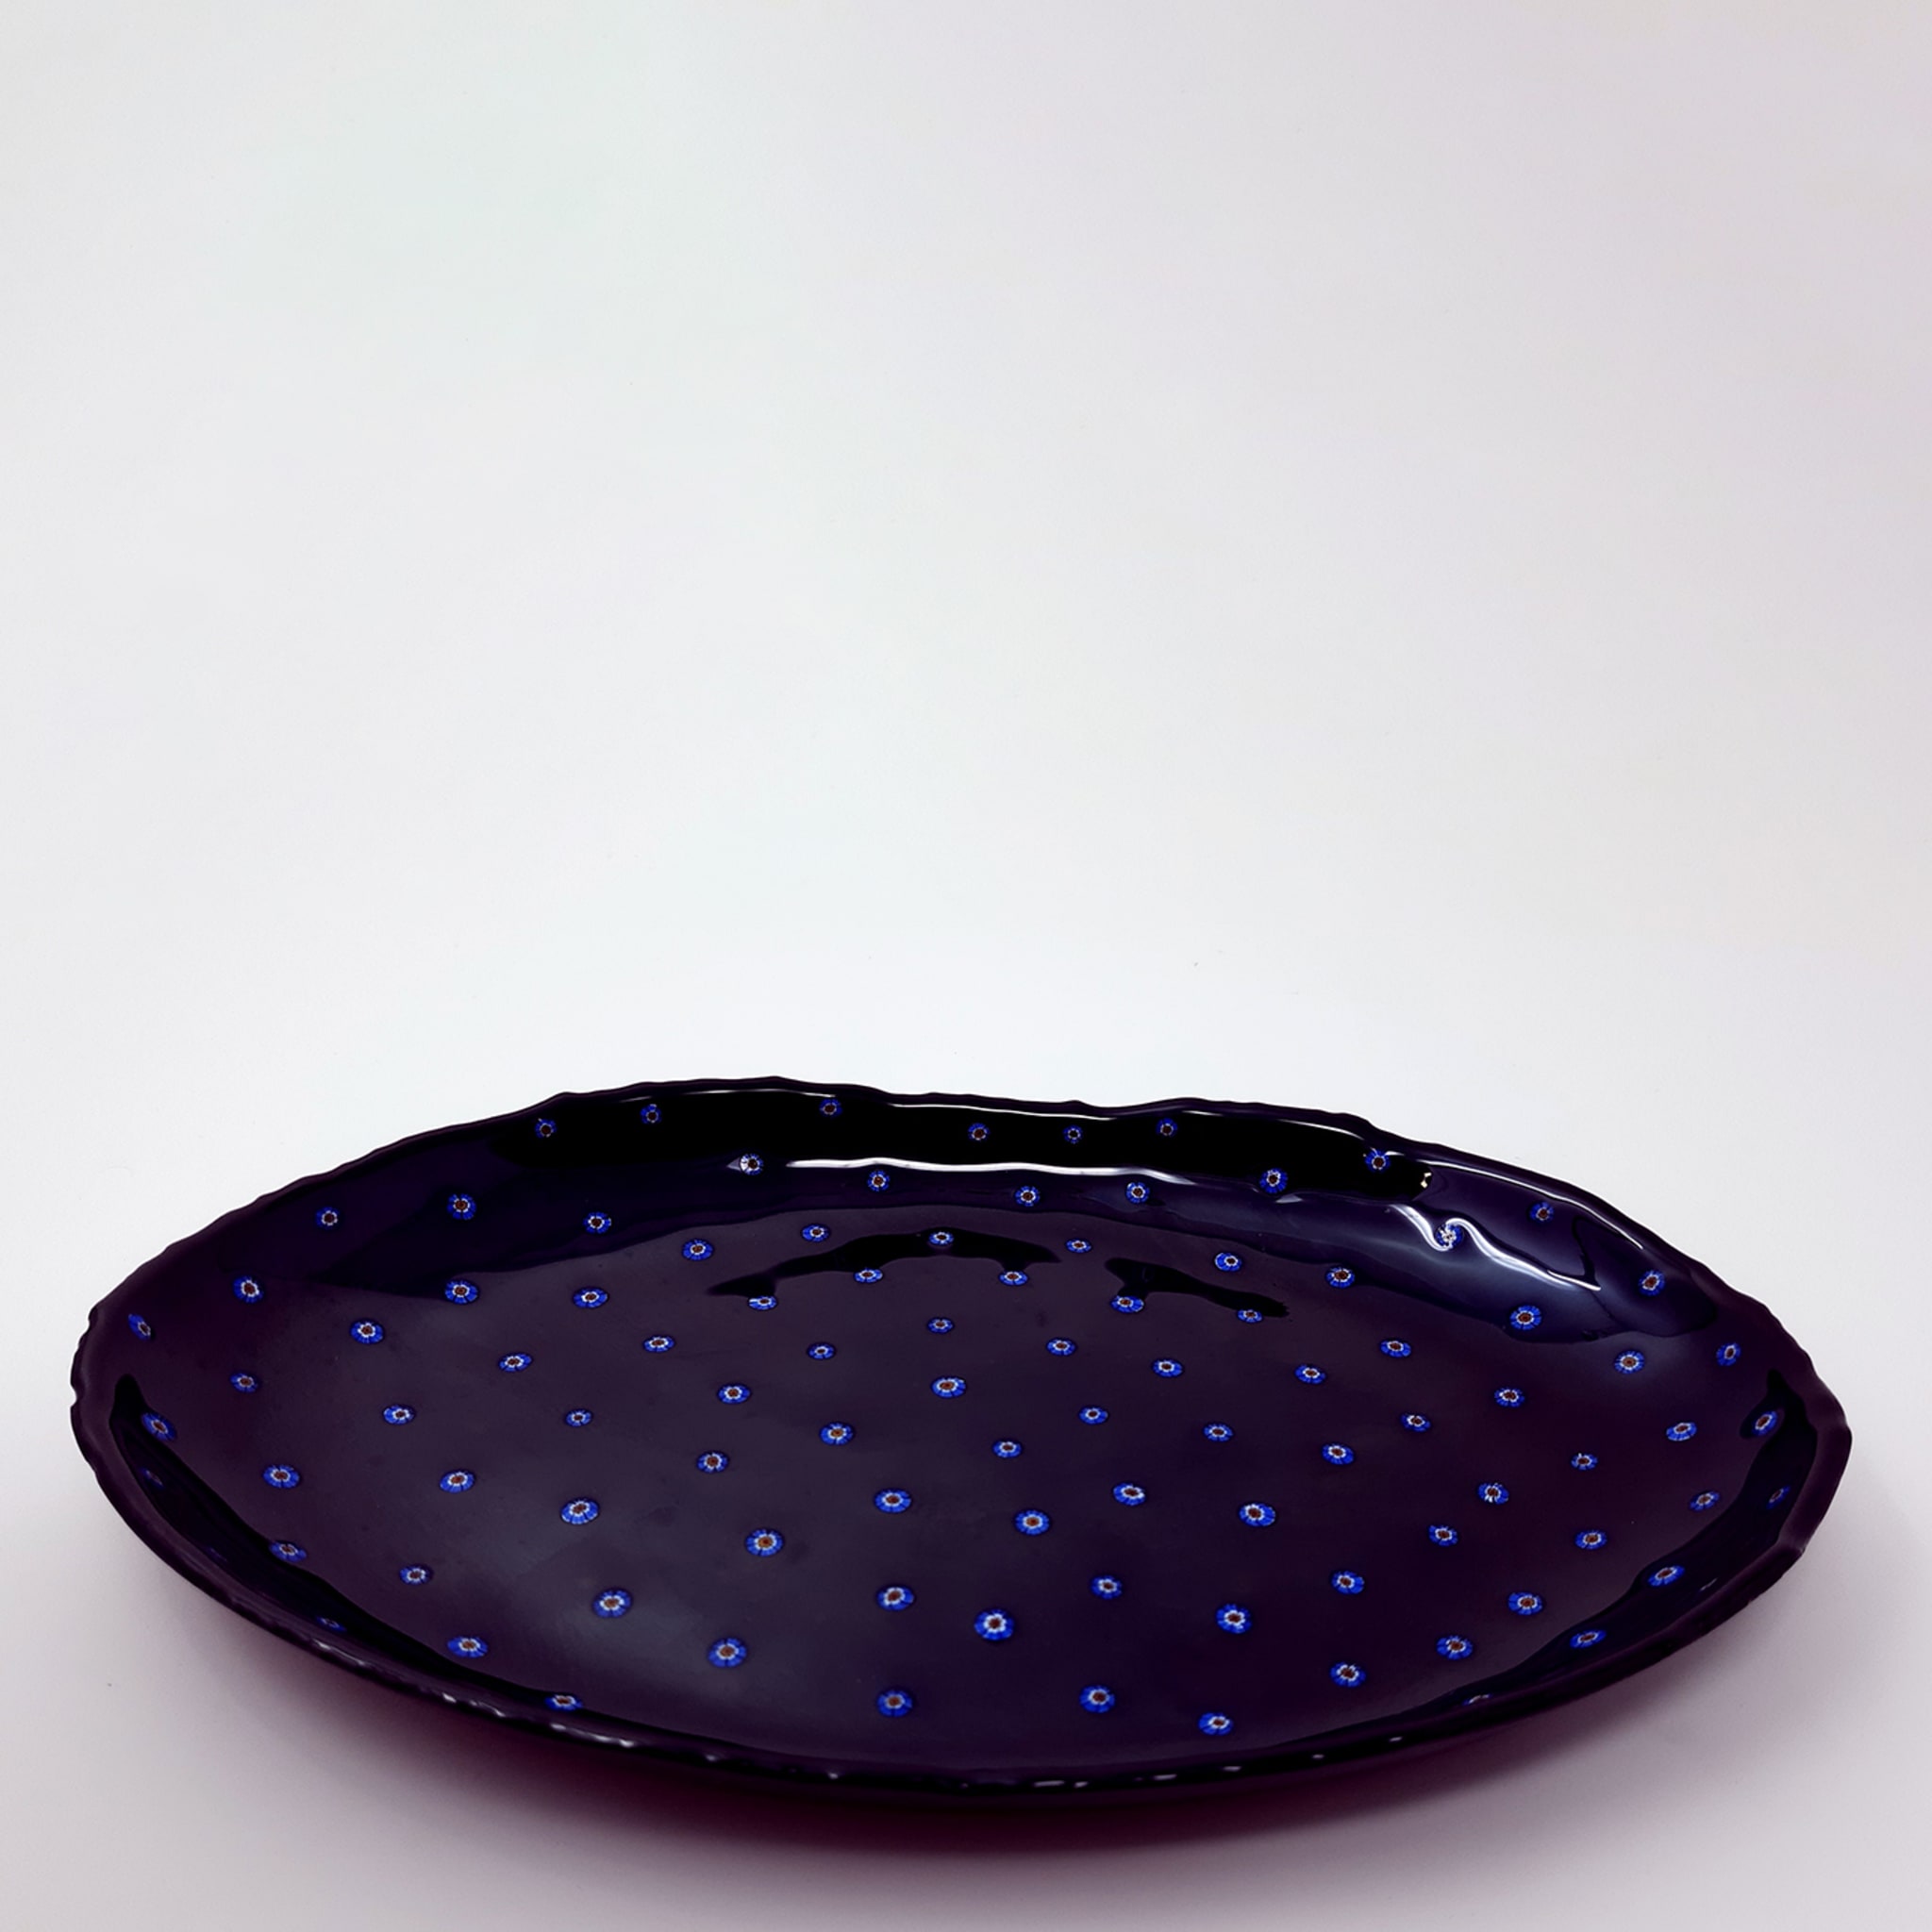 Black Glass Serving Platter with floral murrini inlays - Alternative view 5